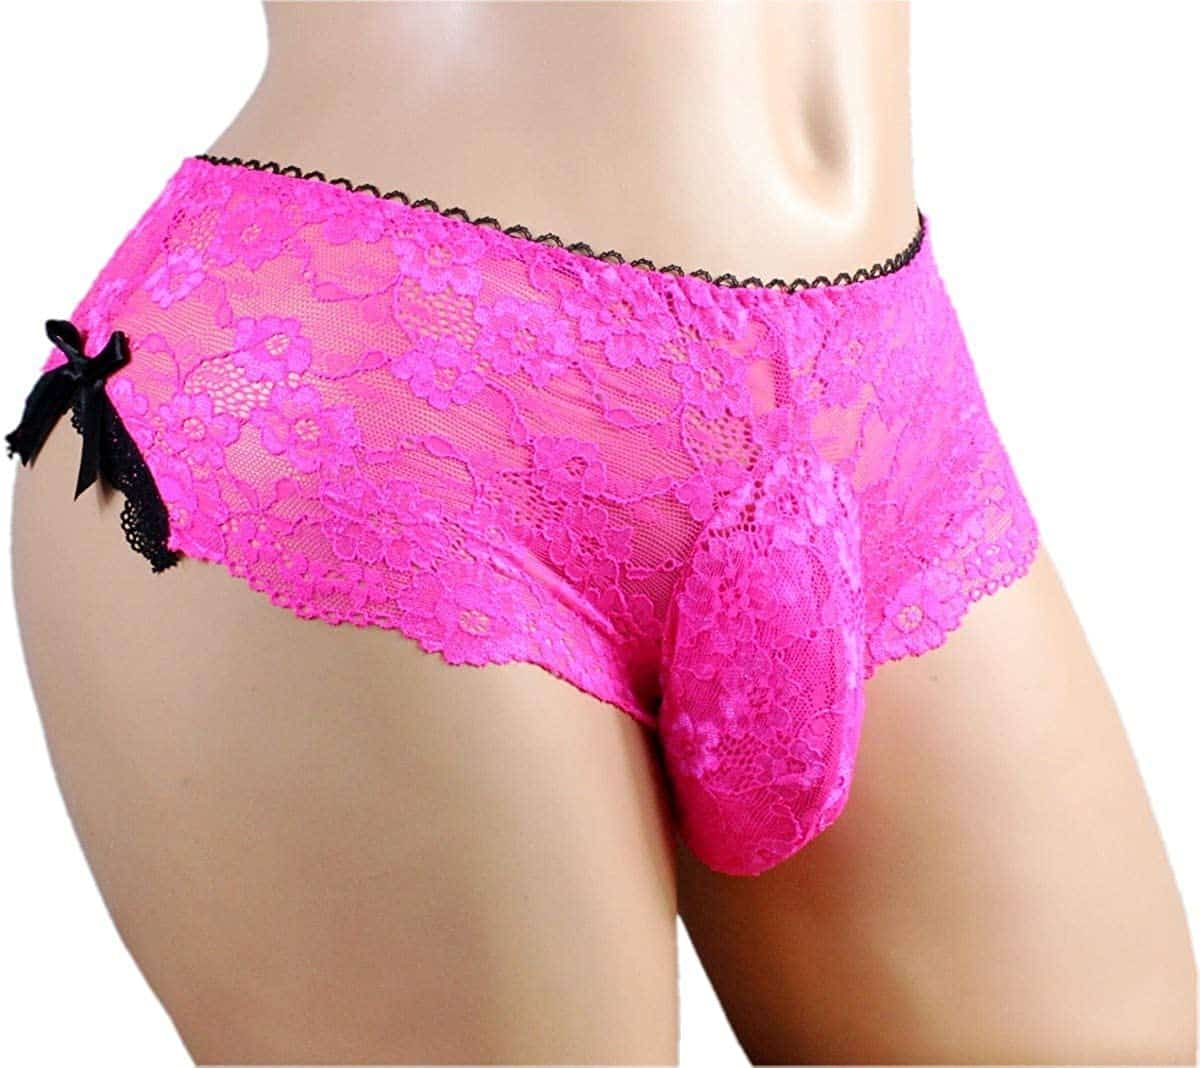 Pink lace see through sissy pouch panties for men